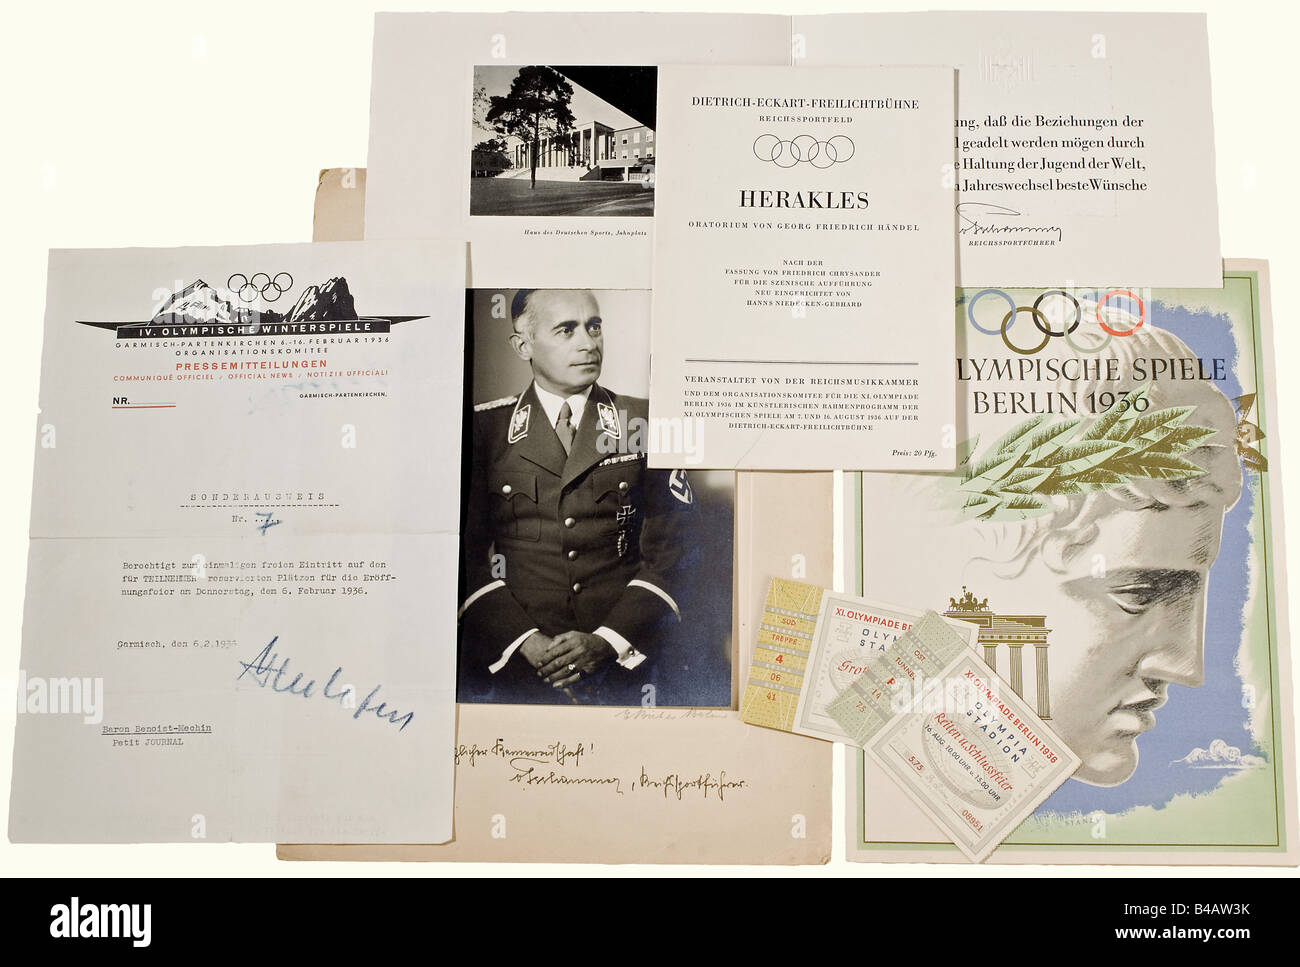 Jacques Benoist-Méchin, Olympic Games 1936., Colour telegram, special ID card for the Winter Games 1936 in Garmisch-Partenkirchen, photographs of Jacques Benoist-Méchin at the Winter Games, invitations, name card of von Tschammer and Osten, card with congratulations and dedication picture of von Tschammer and Osten, telegram from Ribbentrop, admission ticket for the Olympic Games, programme leaflet of the 'Dietrich-Eckart-Freilichtbühne', invitation for the (transl.) 'reception by the Franco-German Society on the occasion of the Olympic Games.'.' historic, hist, Stock Photo